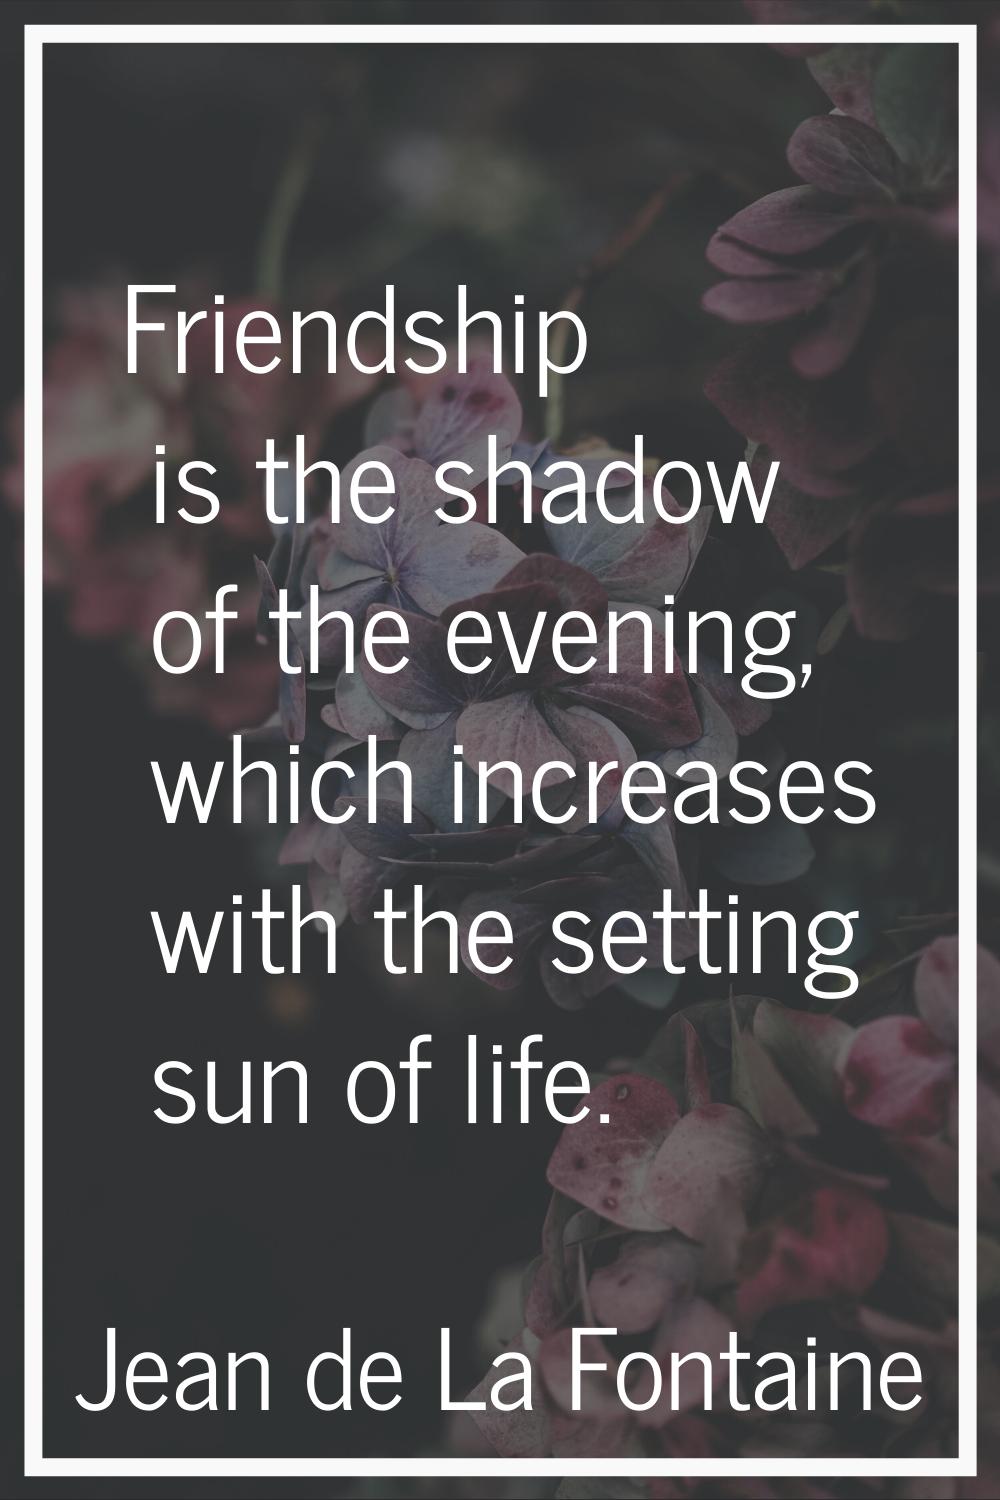 Friendship is the shadow of the evening, which increases with the setting sun of life.